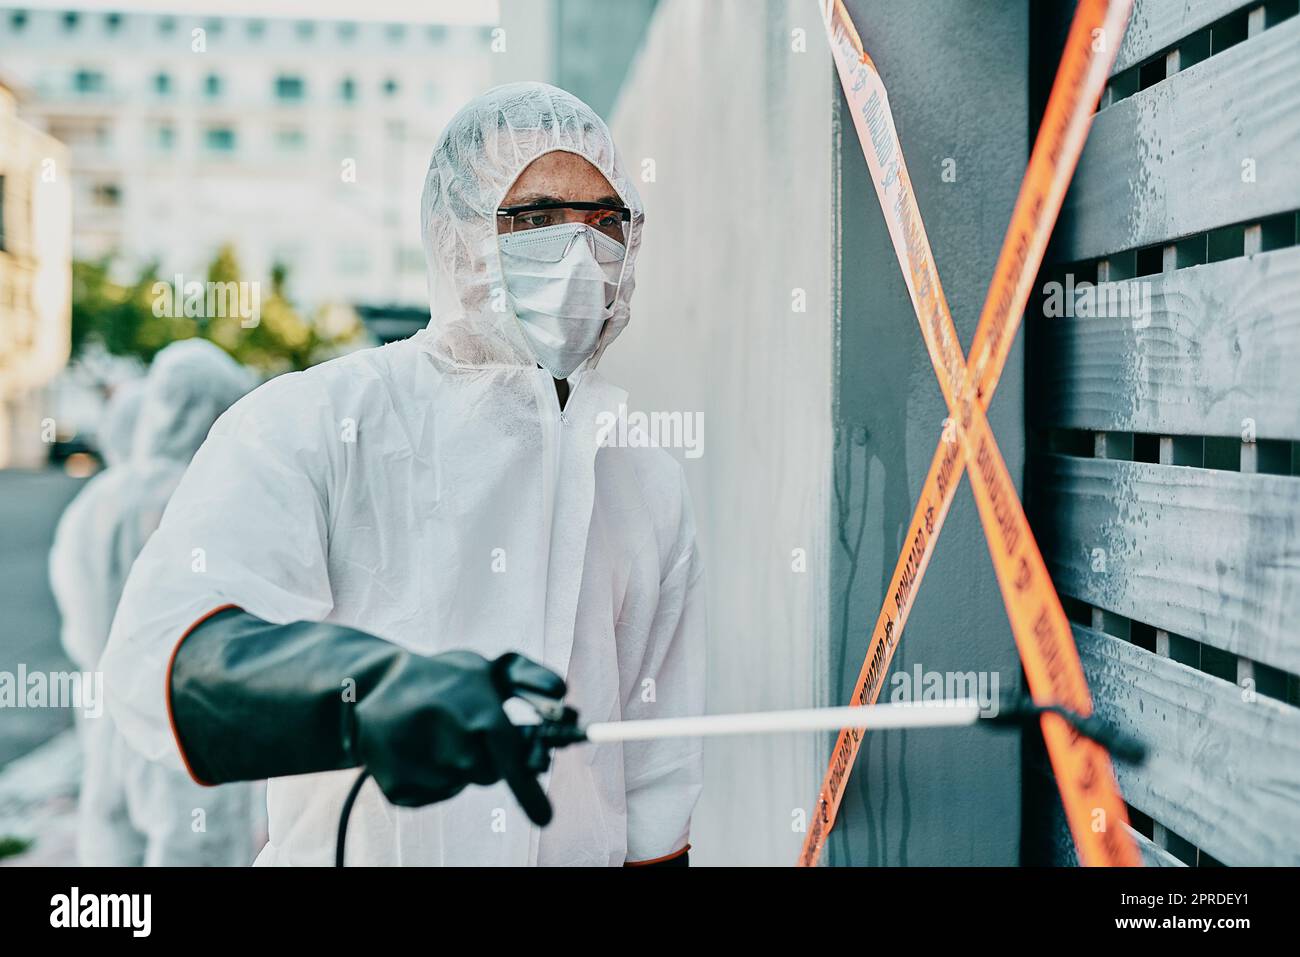 Healthcare worker in covid pandemic, sanitizing and cleaning area with disinfectant, barrier or caution tape and a face mask. Emergency medical person in hazmat suit working in coronavirus crisis Stock Photo